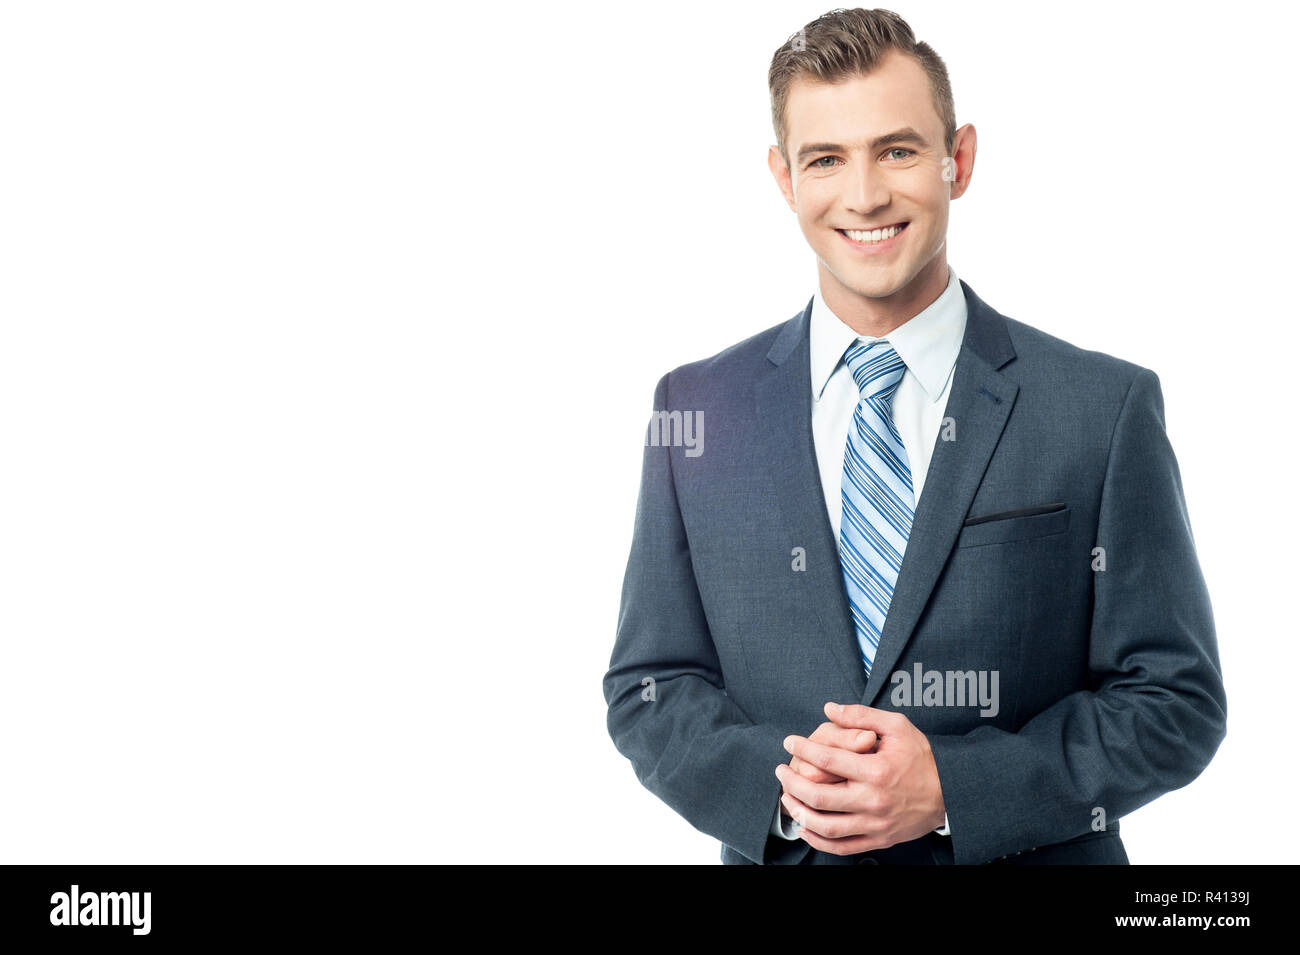 Confident business person, hands clasped Stock Photo